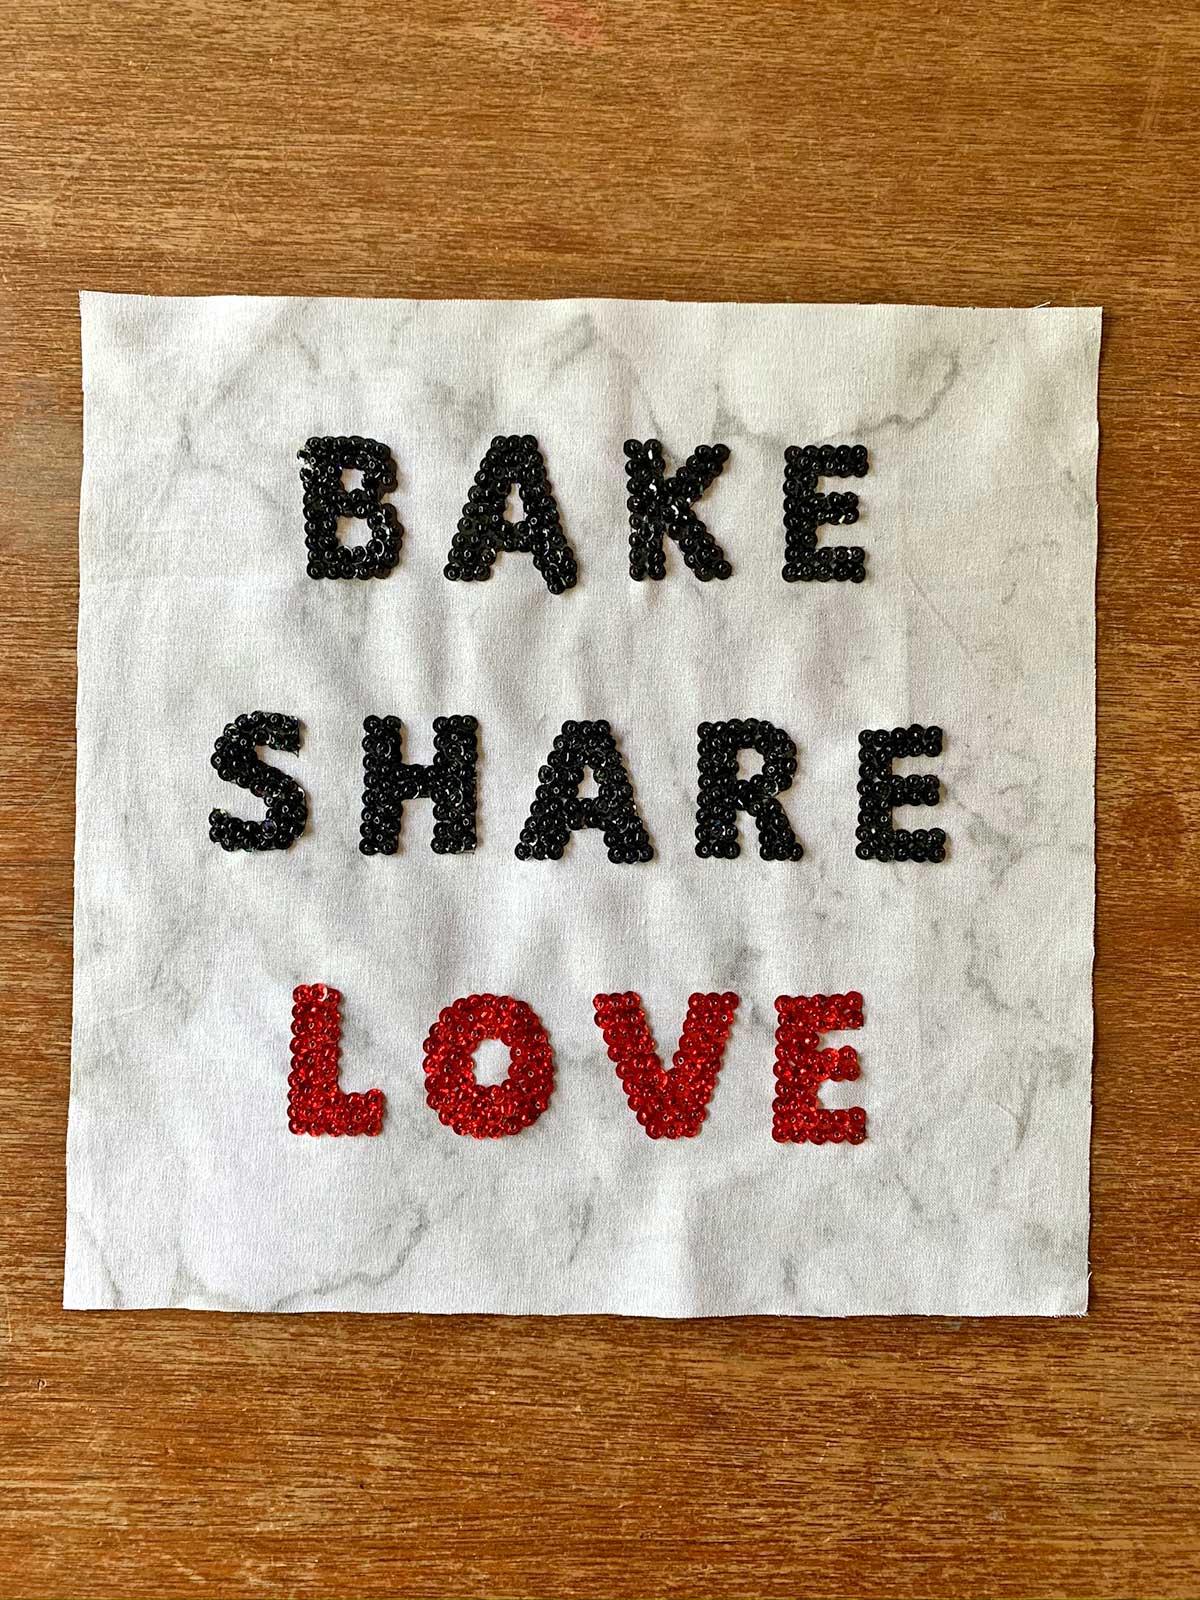 Molly's quilt square, with the words "Bake, Share, Love"